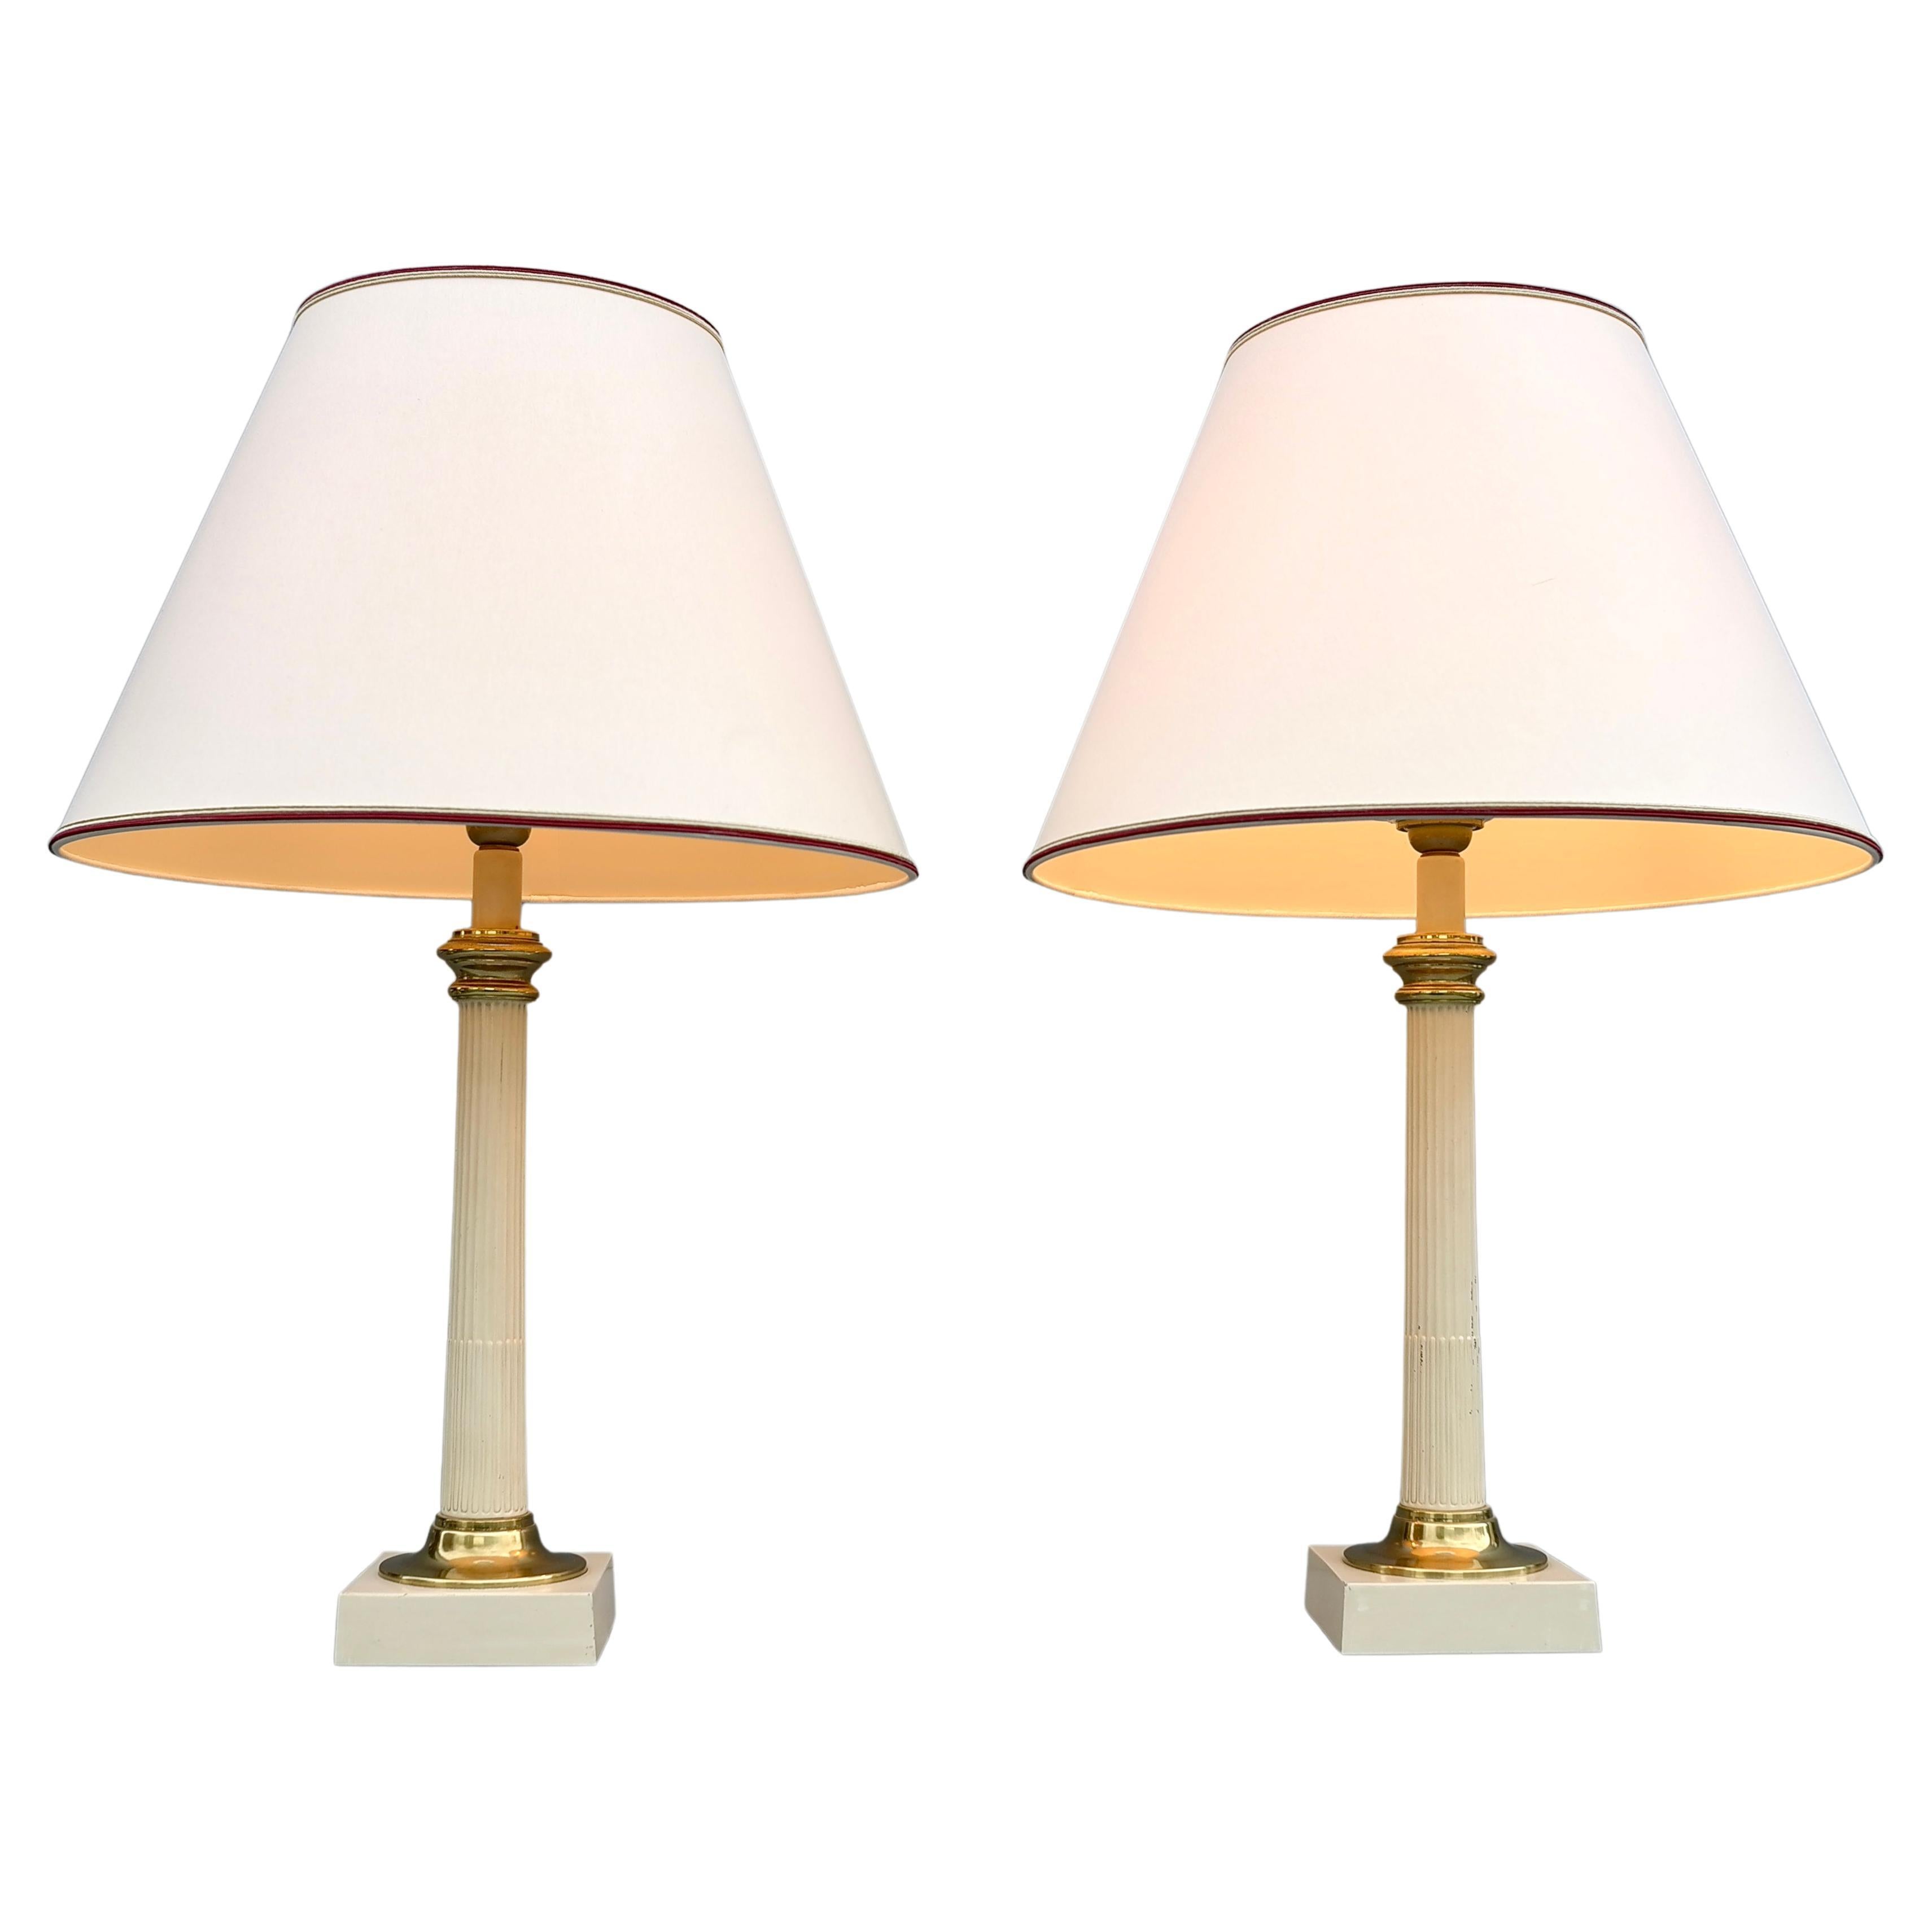 Pair of Column Table Lamps in Off White Metal and Brass Details, France 1960's